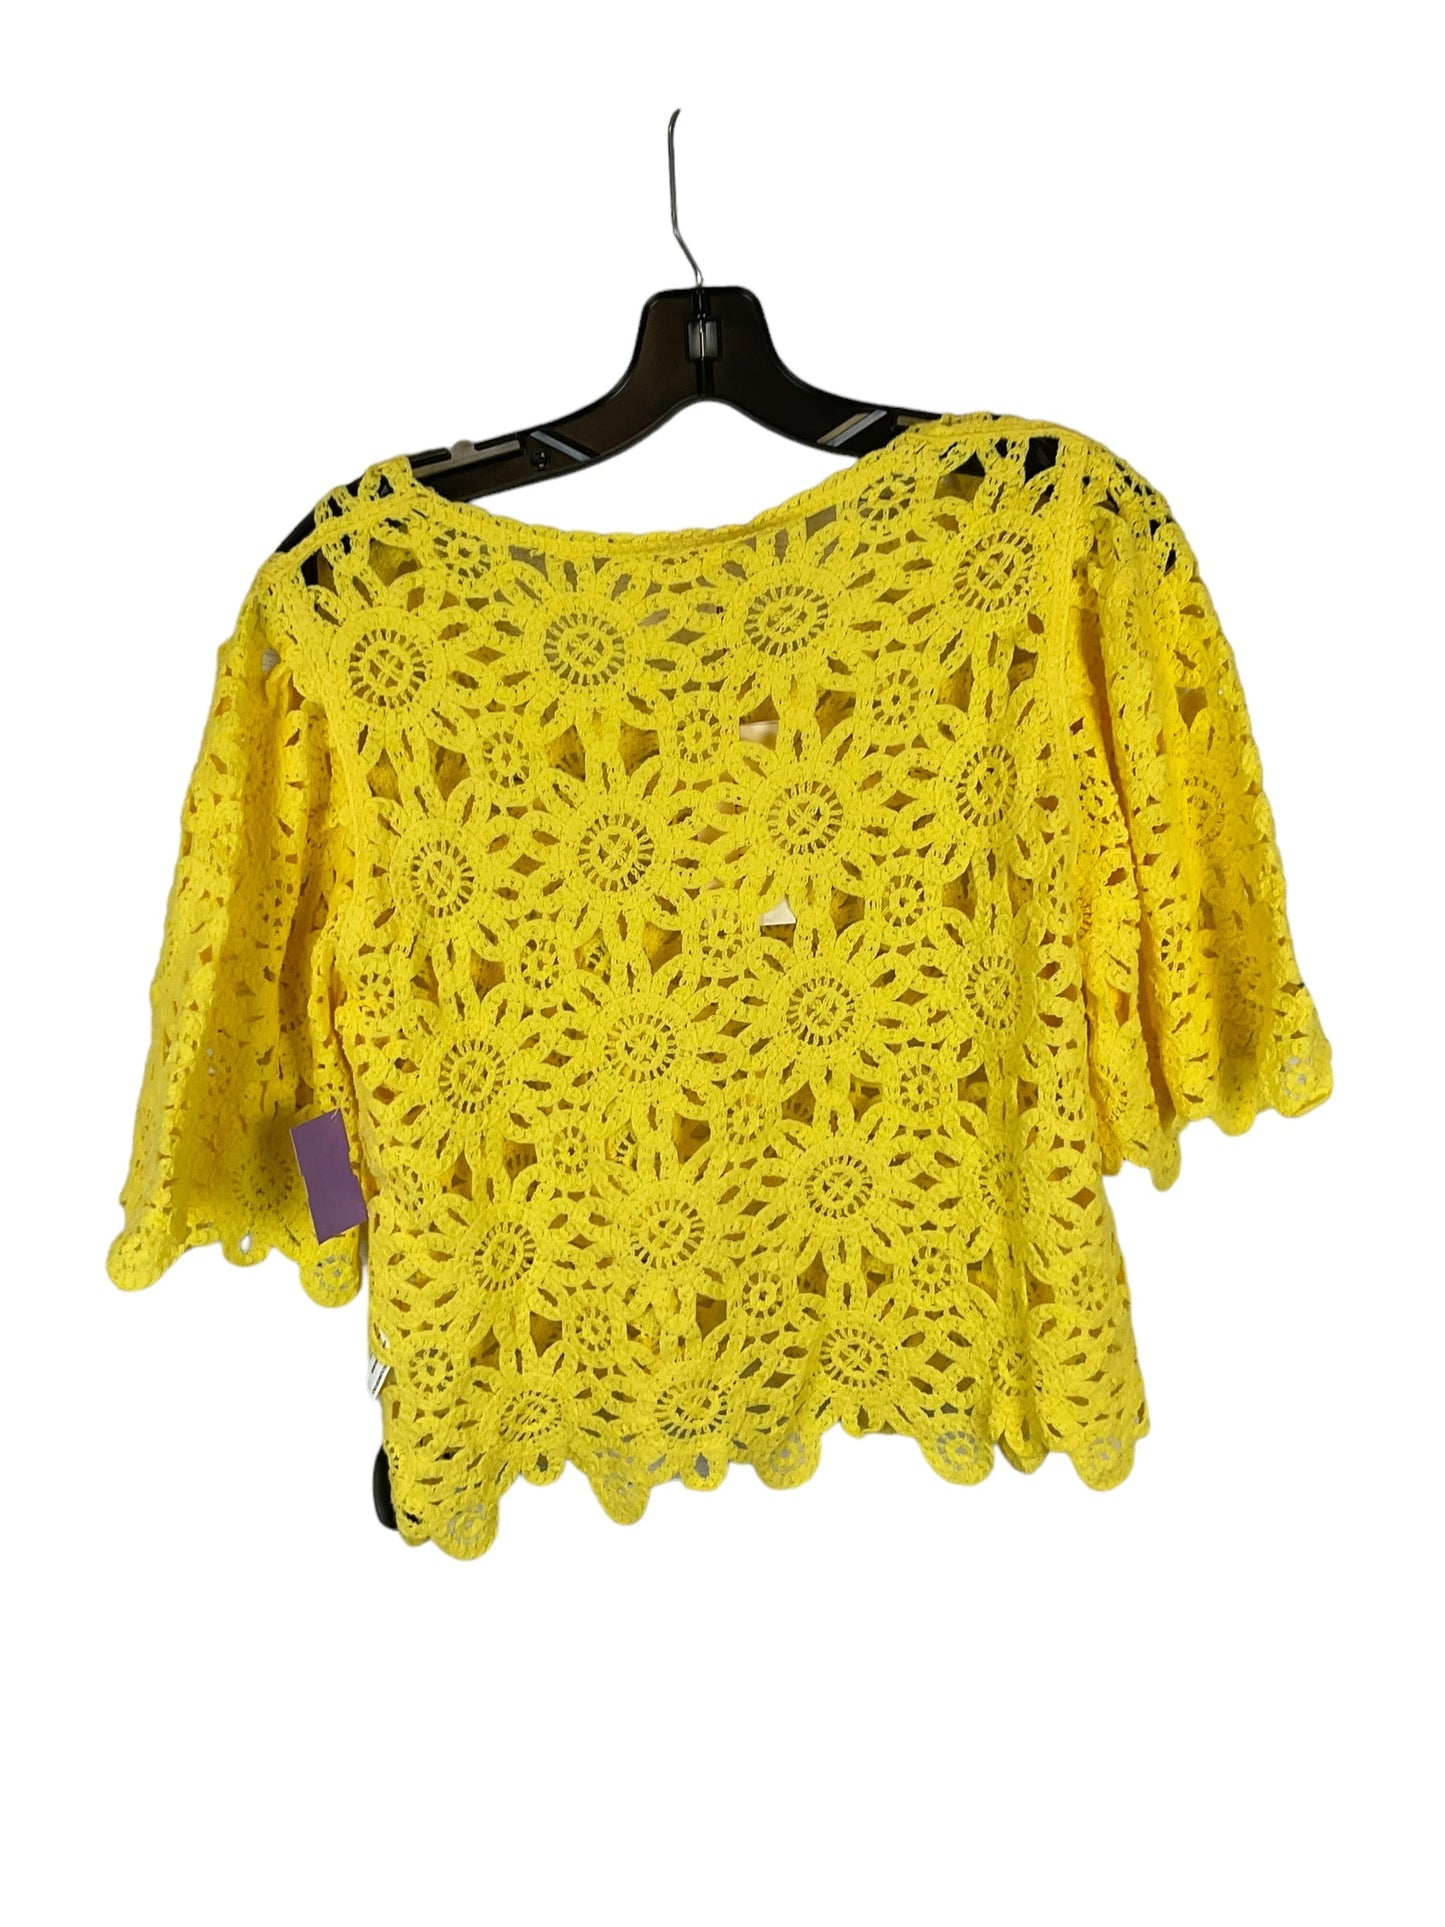 Yellow Top Short Sleeve Solitaire, Size Xs